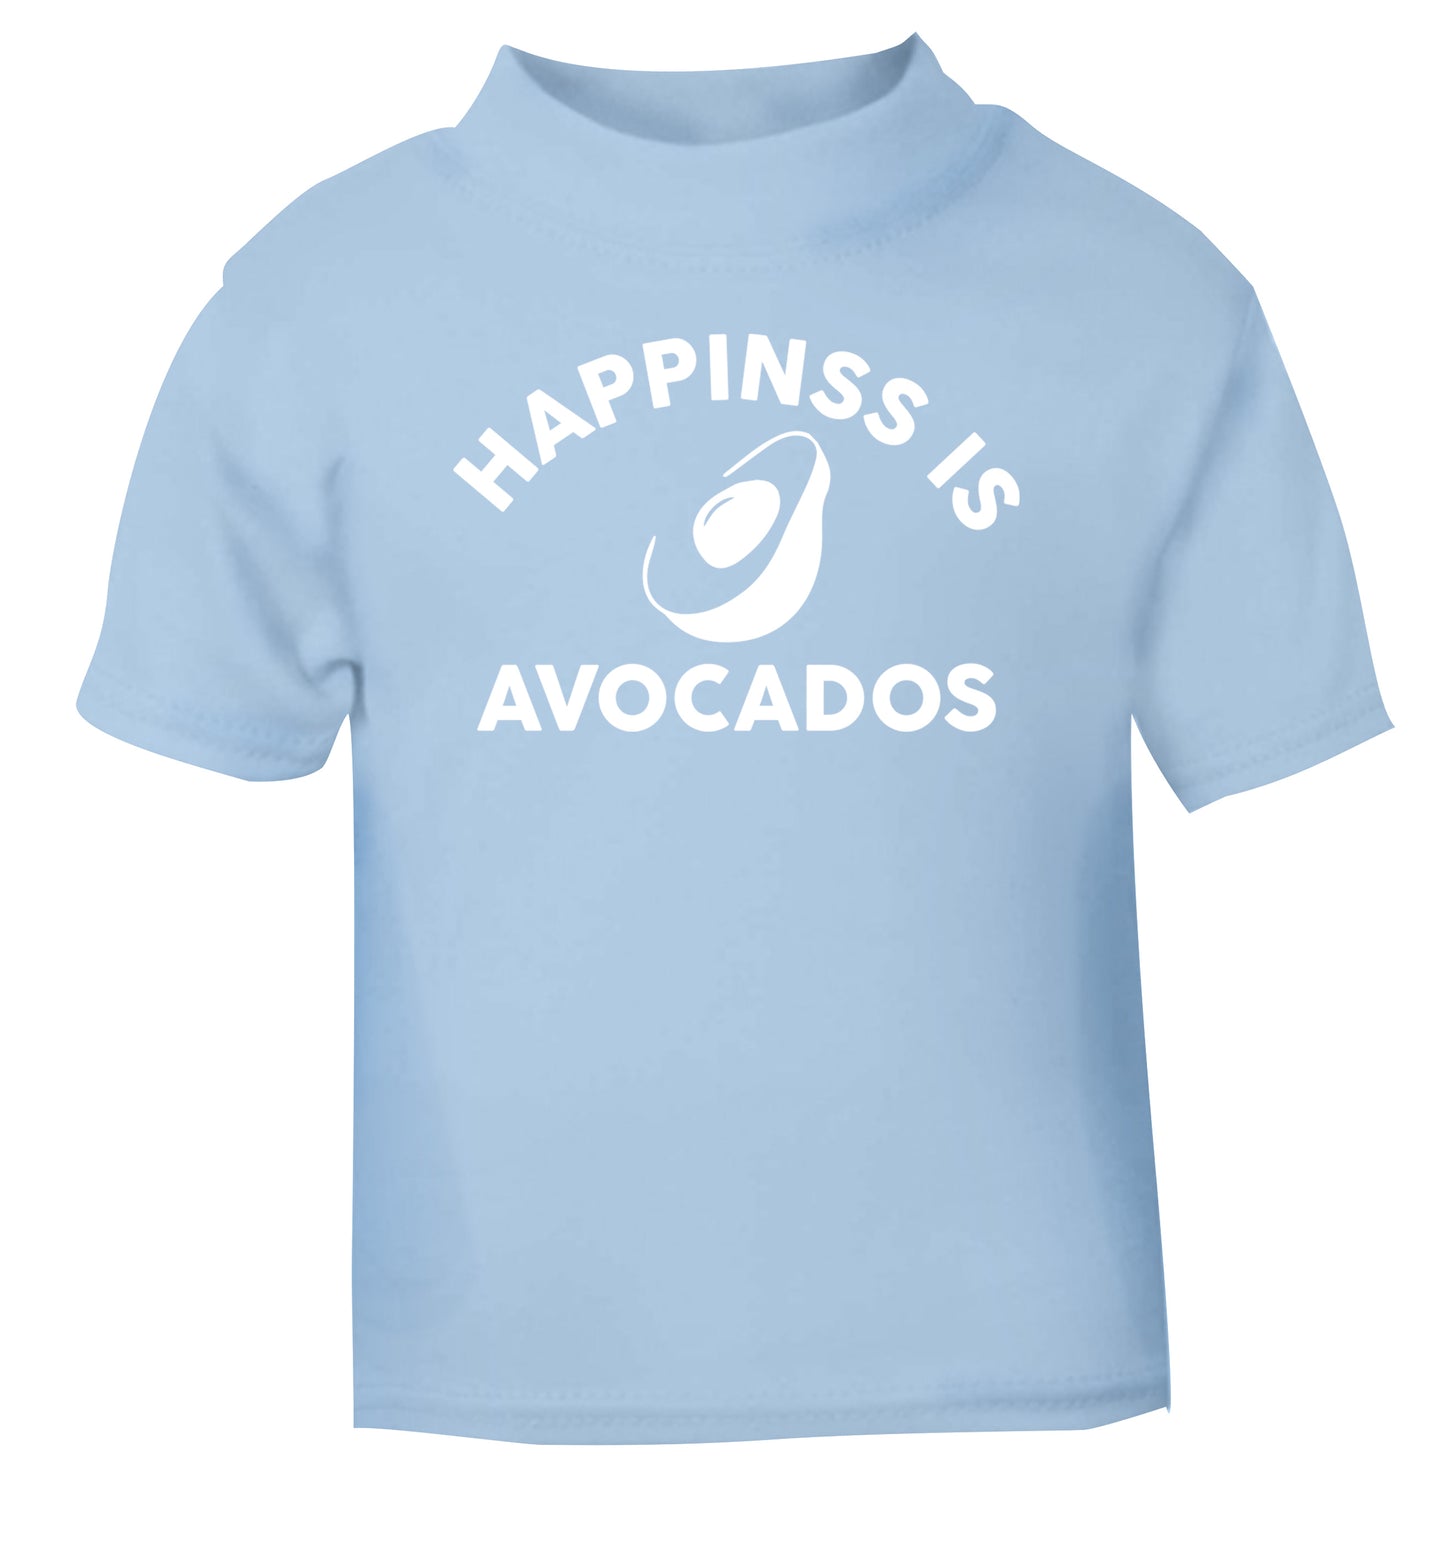 Happiness is avocados light blue Baby Toddler Tshirt 2 Years